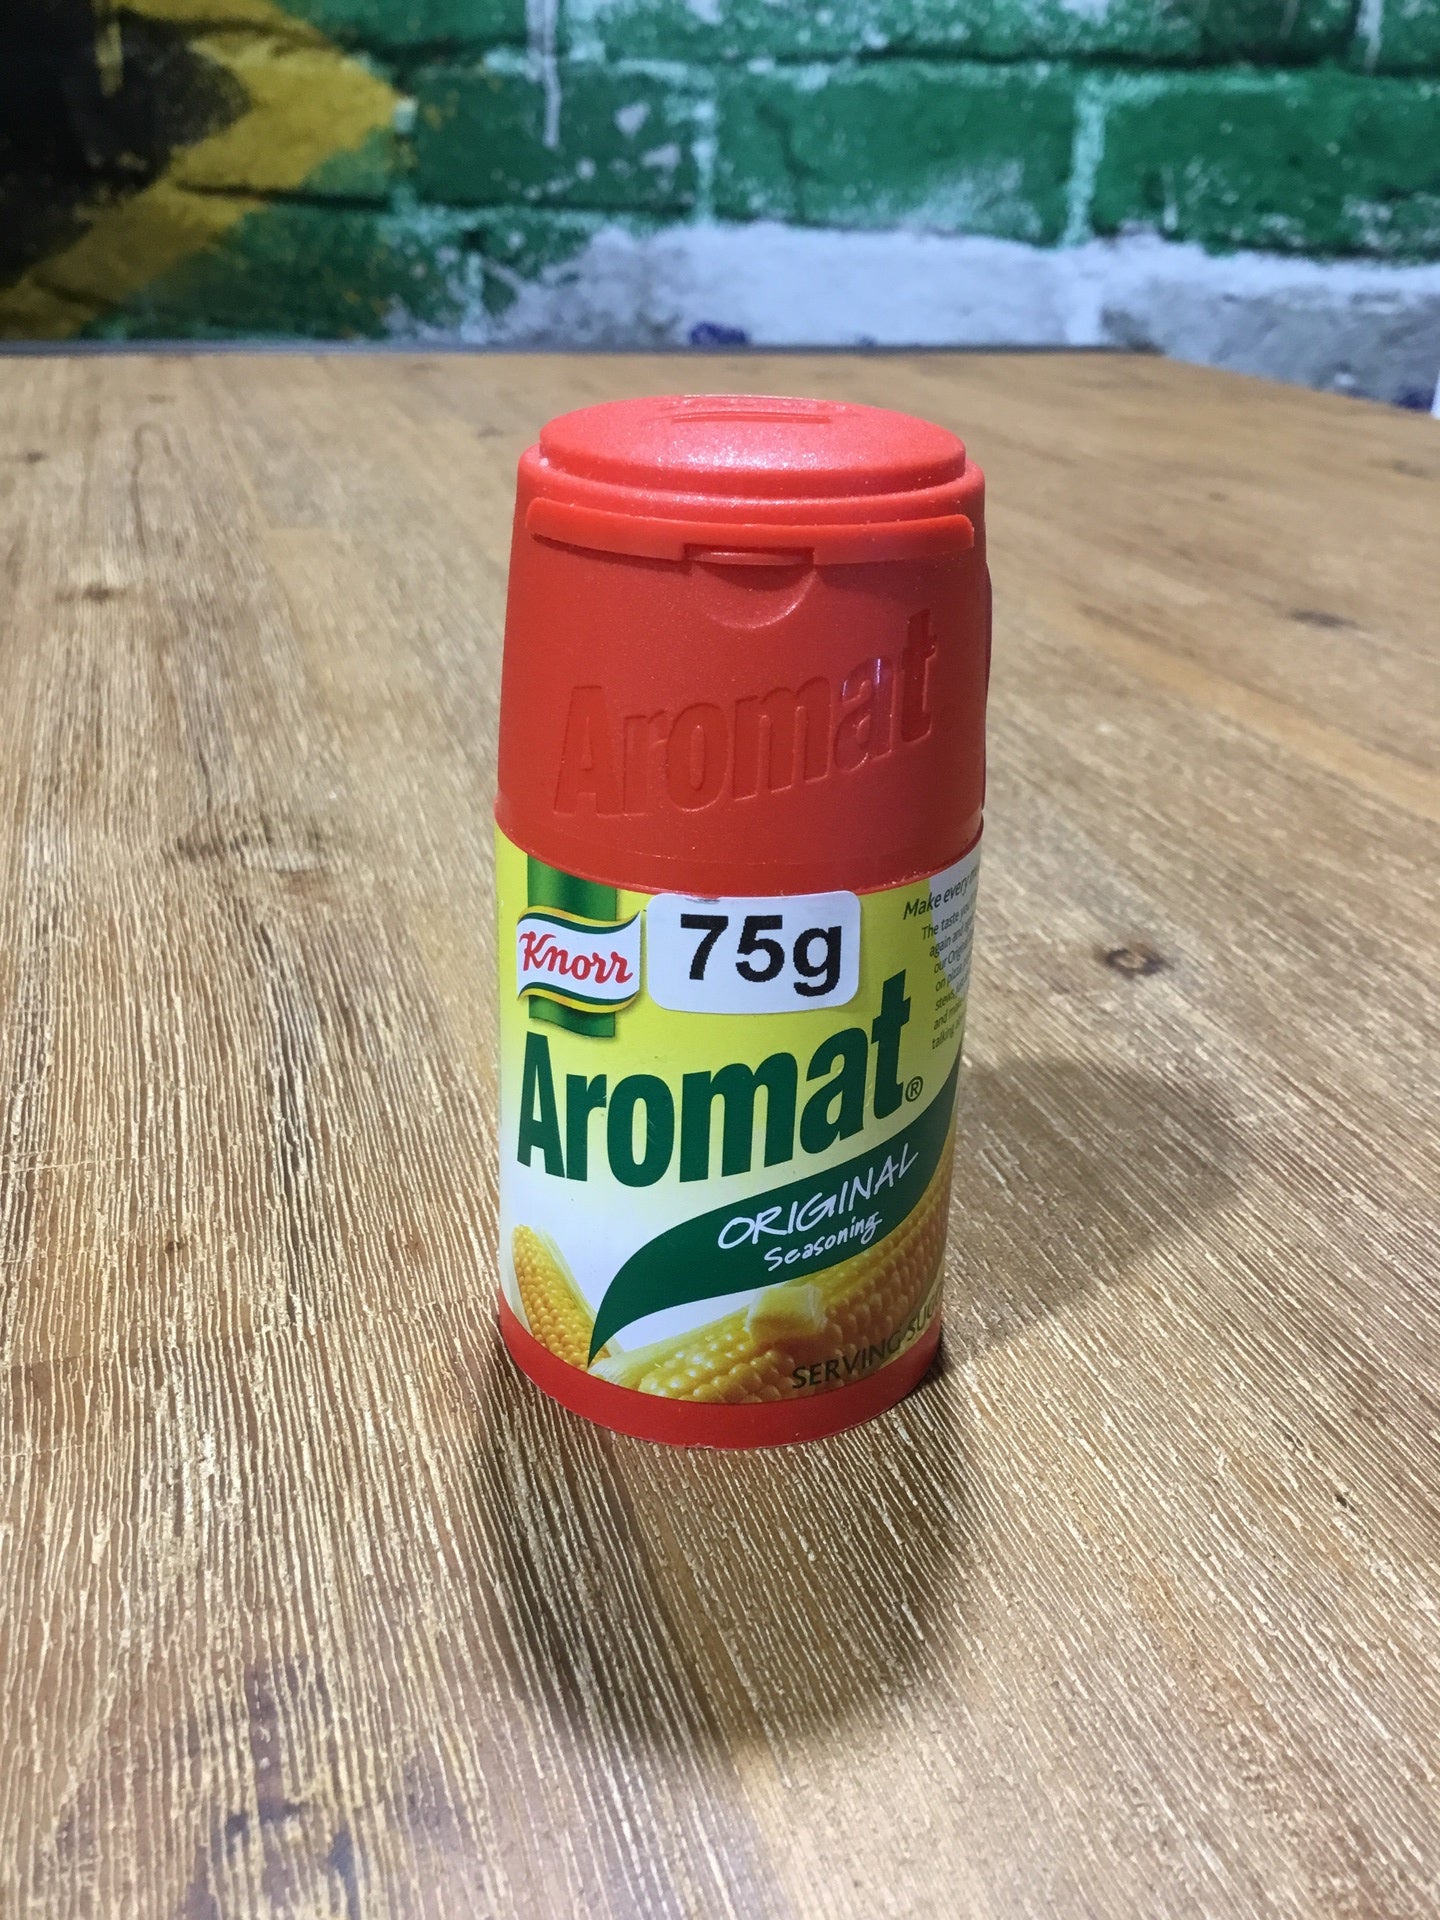 Knorr Aromat Canister 75g